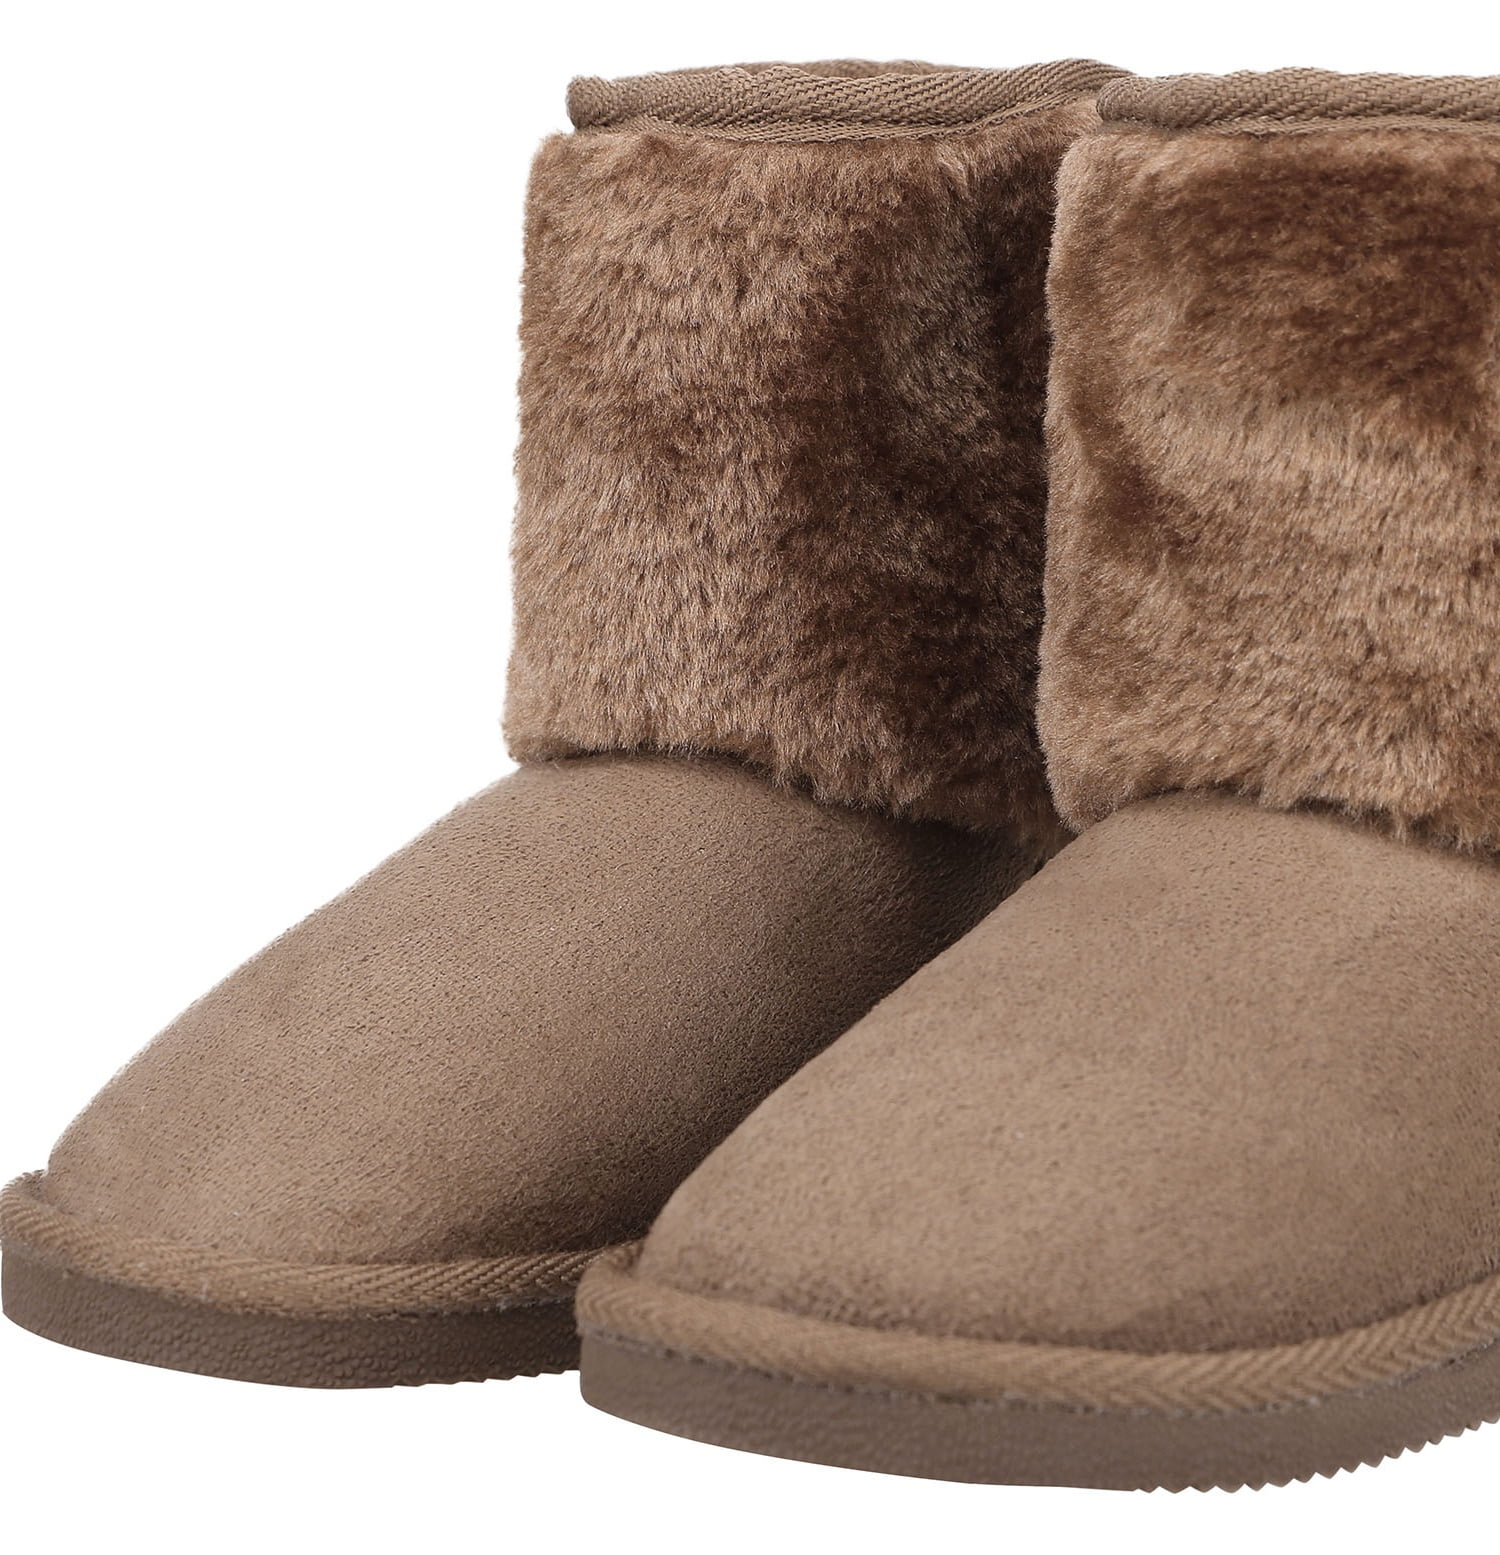 Camel Faux Suede Fur Top Booties Girls Winter Kids Boots Baby Toddlers Size 3 